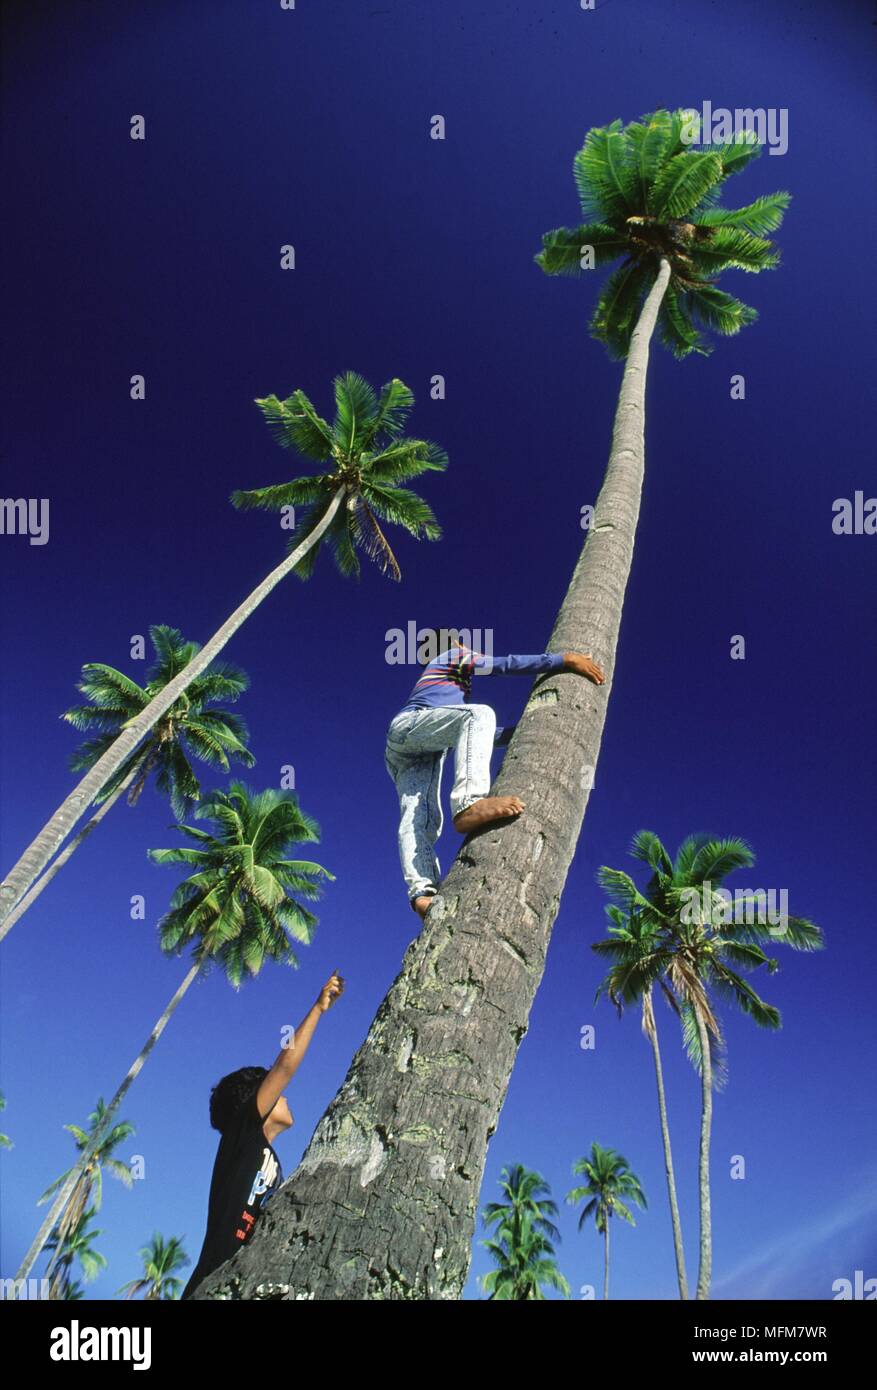 Terengganu, Malaysia - A village boy climbing tall coconut tree. Coconut trees are commonly found along the sandy beaches of Malaysia.     Date:  15.0 Stock Photo